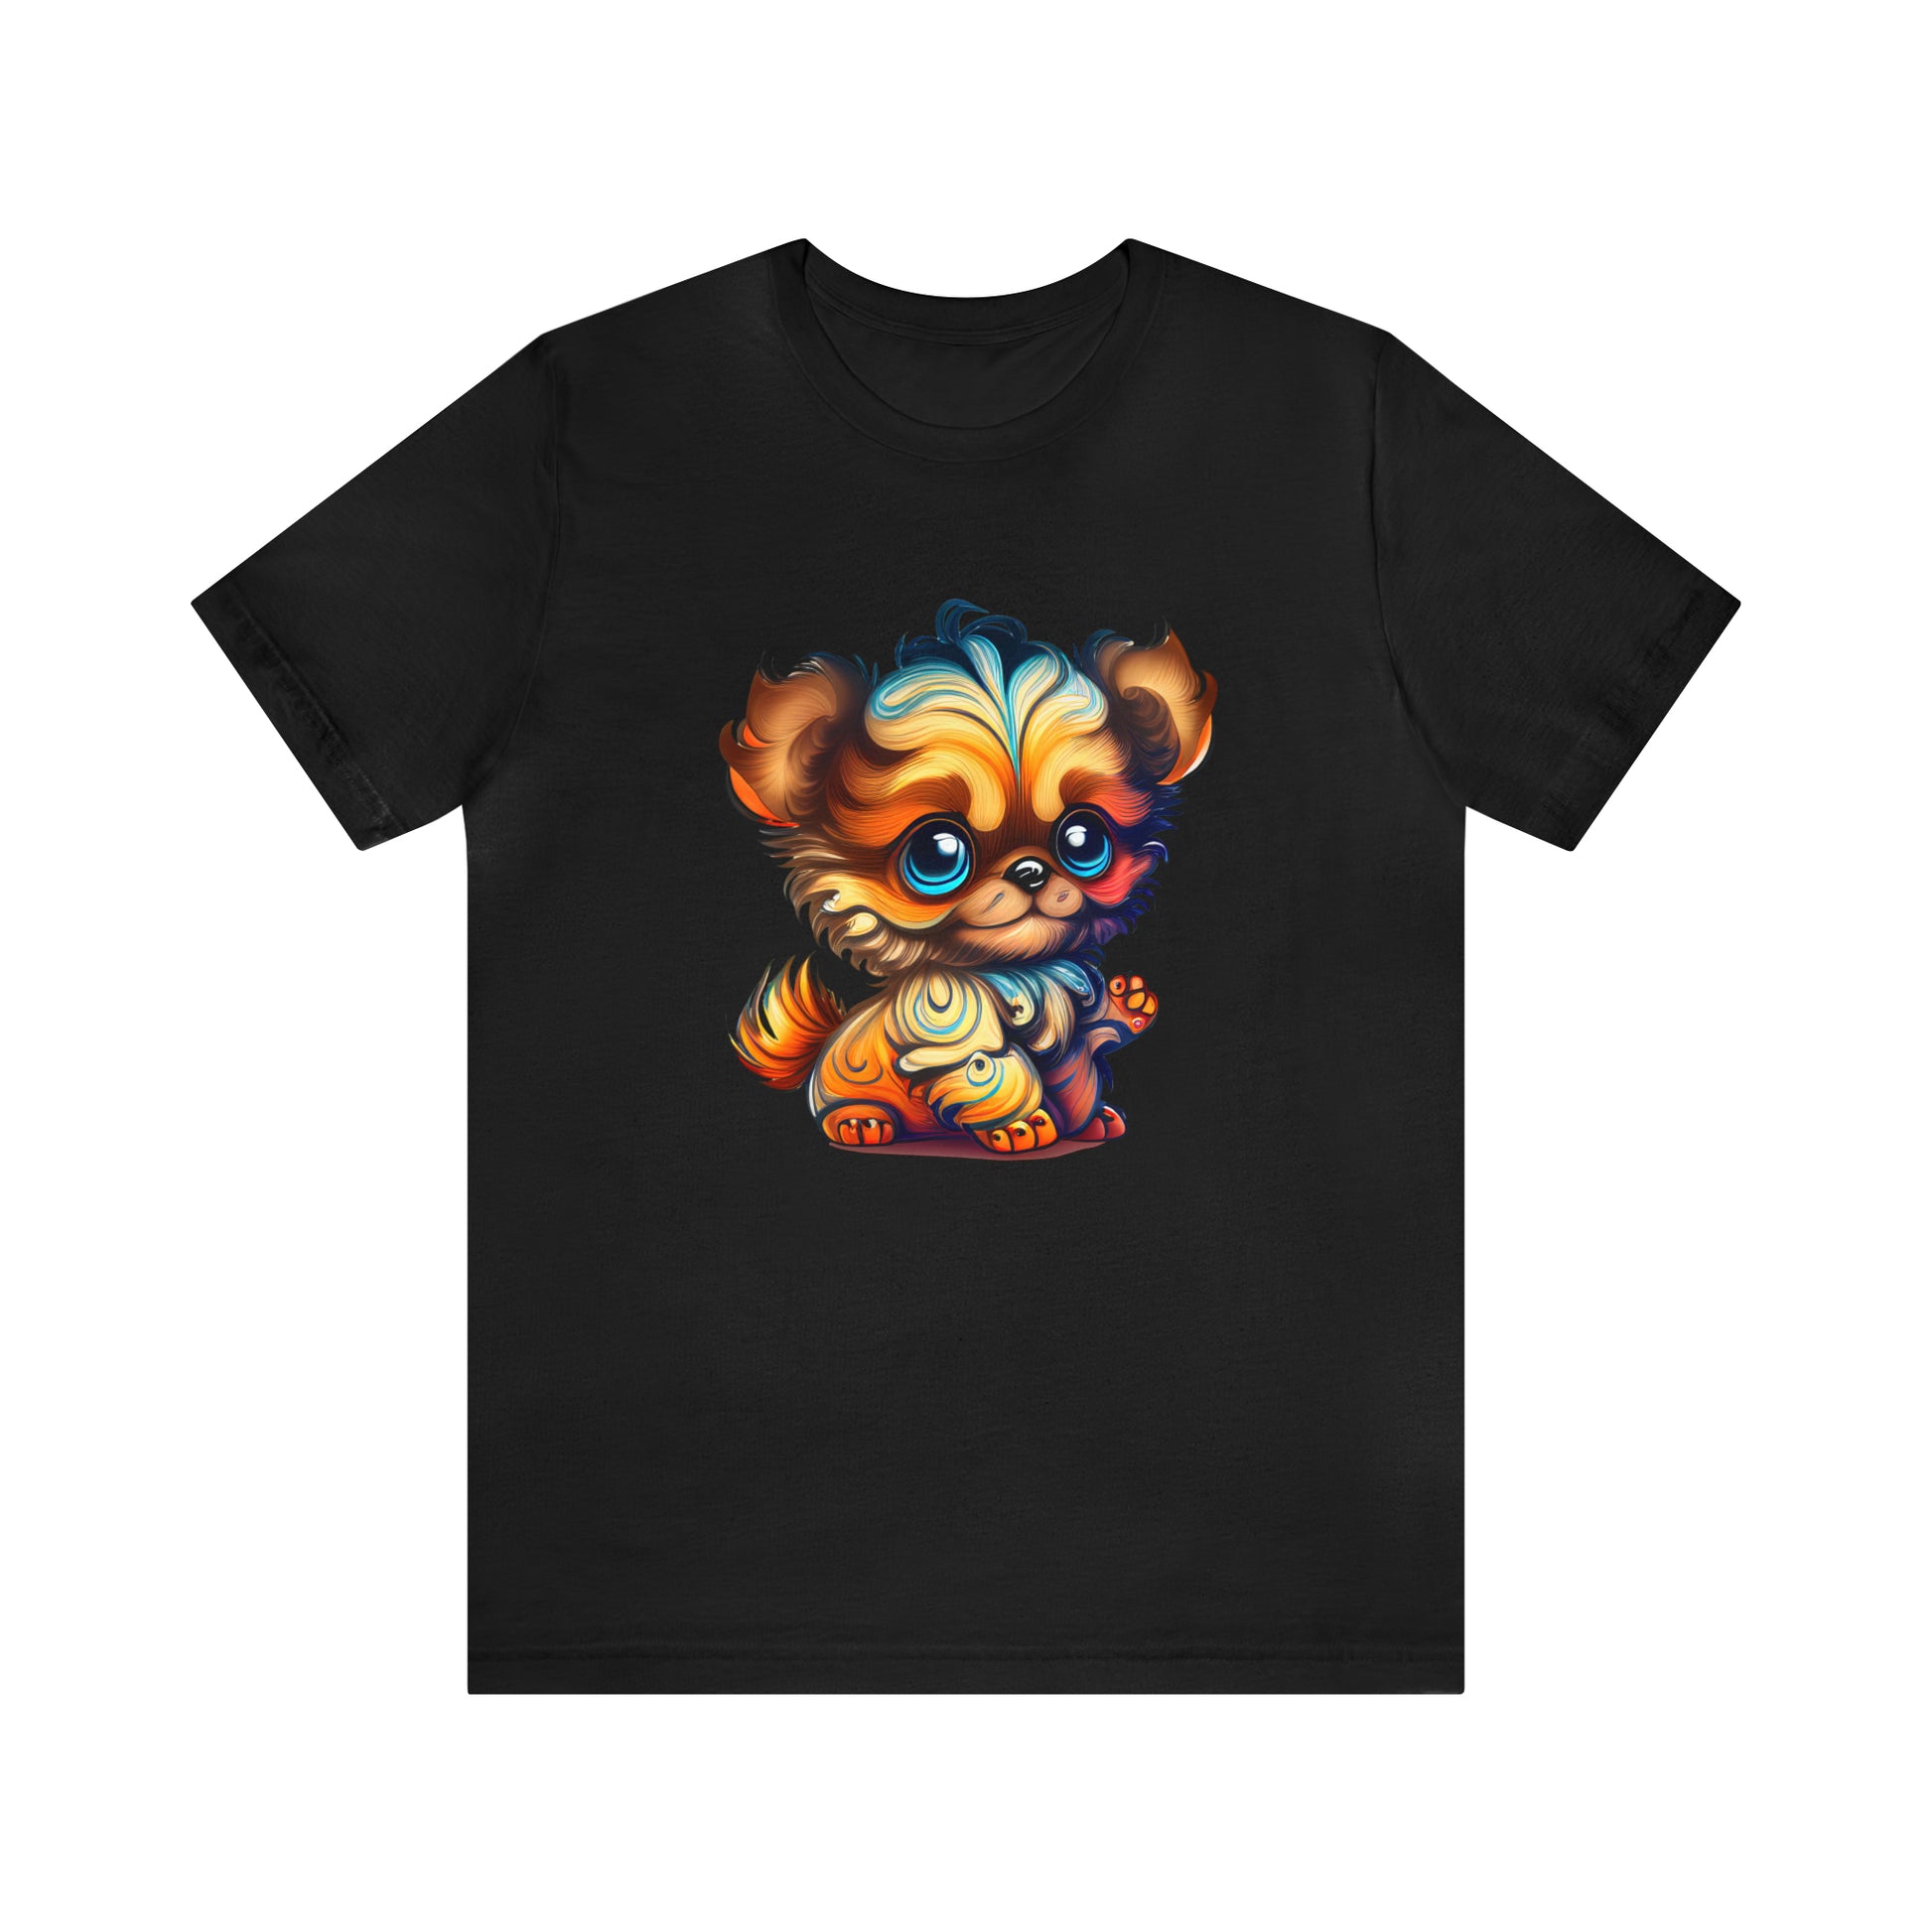 psychedelicBRANDz's Woof Wave Wonder featuring a cute puppy on a black shirt